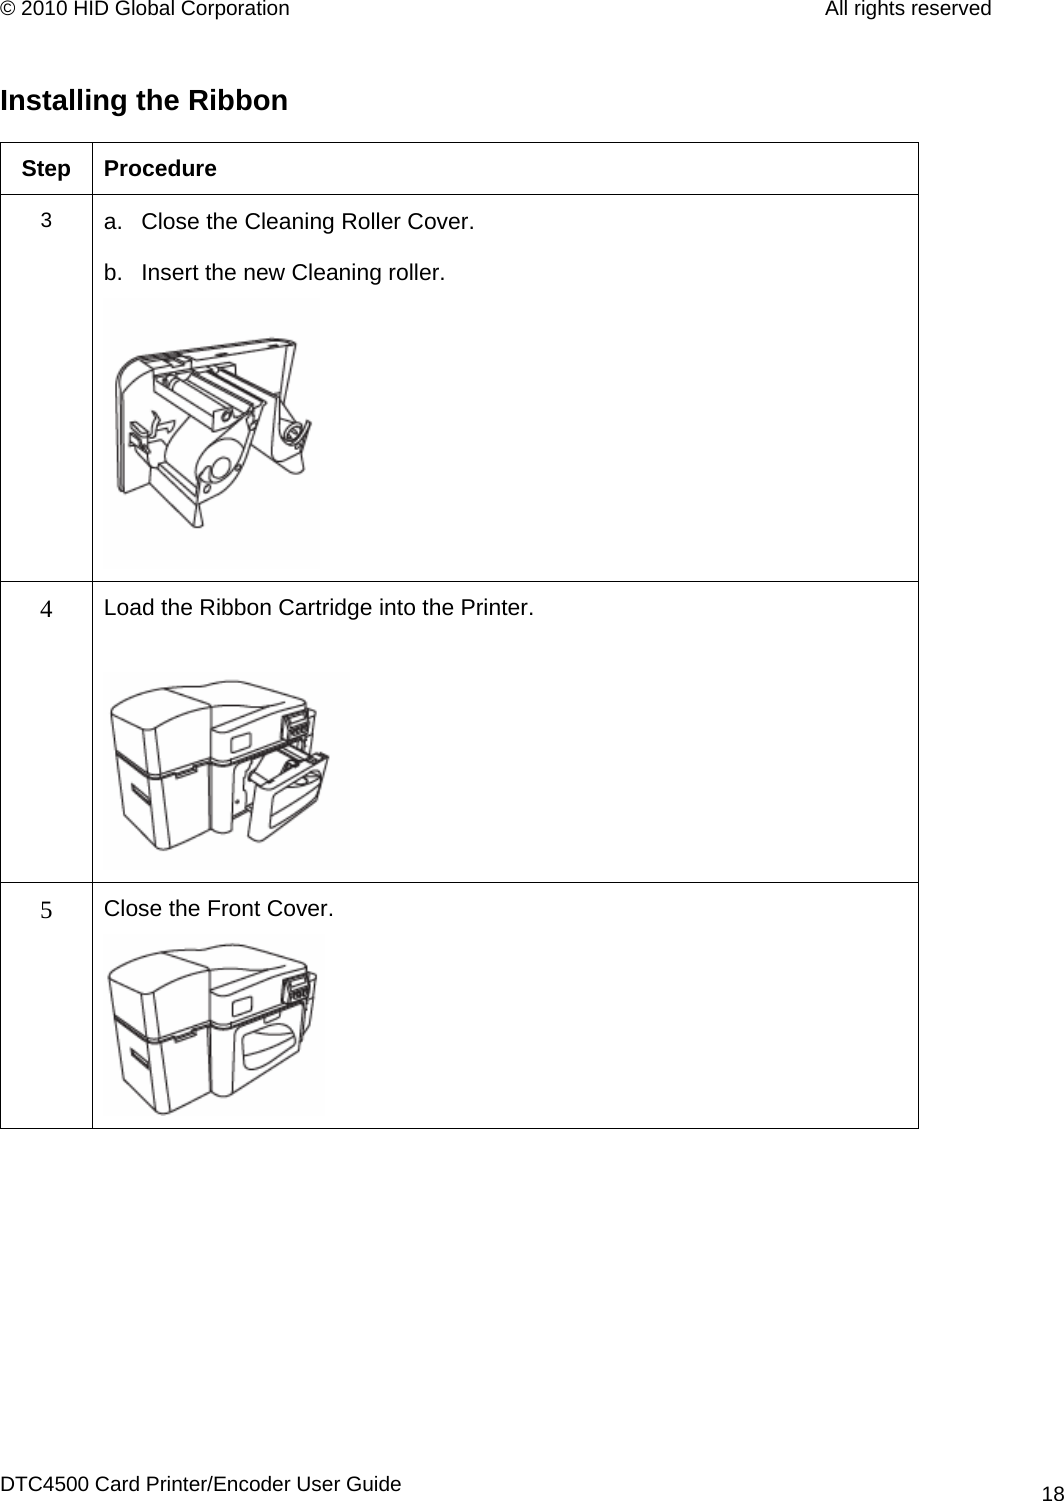 © 2010 HID Global Corporation         All rights reserved  Installing the Ribbon  Step Procedure 3  a.  Close the Cleaning Roller Cover. b.  Insert the new Cleaning roller.  4 Load the Ribbon Cartridge into the Printer.   5 Close the Front Cover.   DTC4500 Card Printer/Encoder User Guide 18